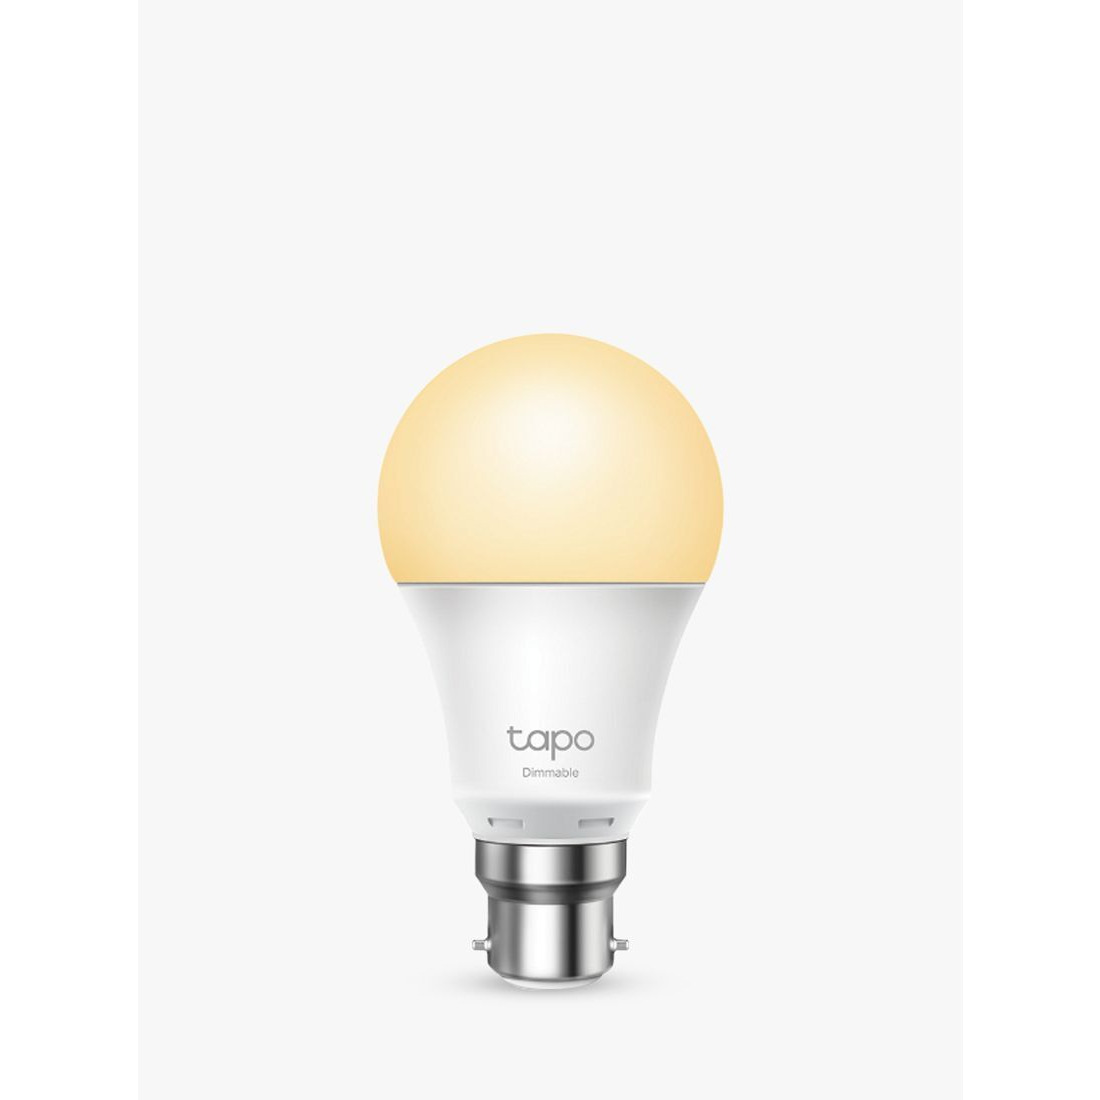 TP-Link Tapo L510B Wi-Fi, B22, Smart LED Light Bulb with Dimmable Light - image 1